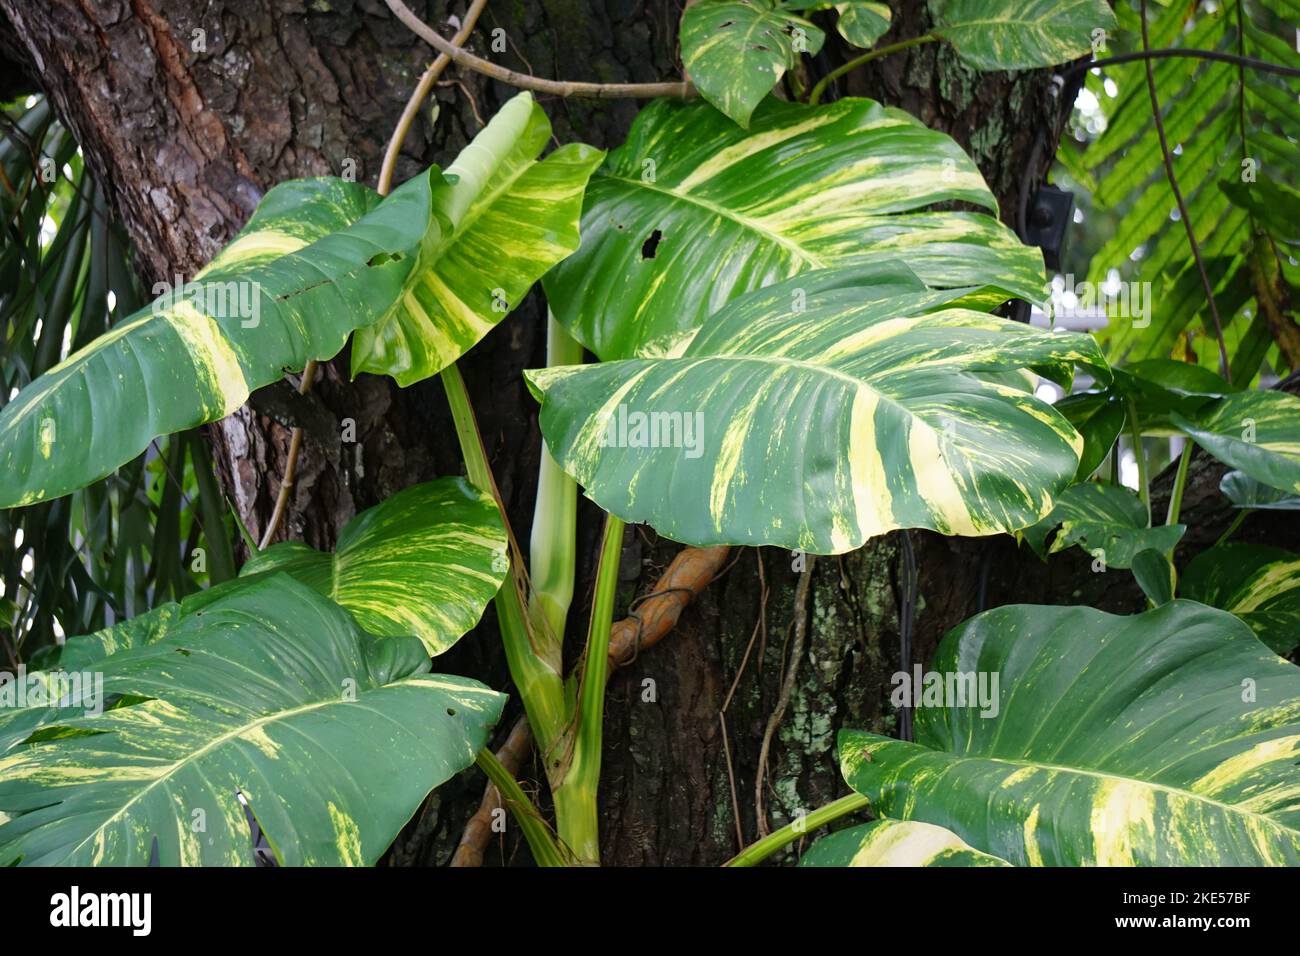 Epipremnum aureum (Also called golden pothos, Ceylon creeper, hunter's robe, sirih gading) on the tree. The plant is listed as toxic to cats and dogs Stock Photo